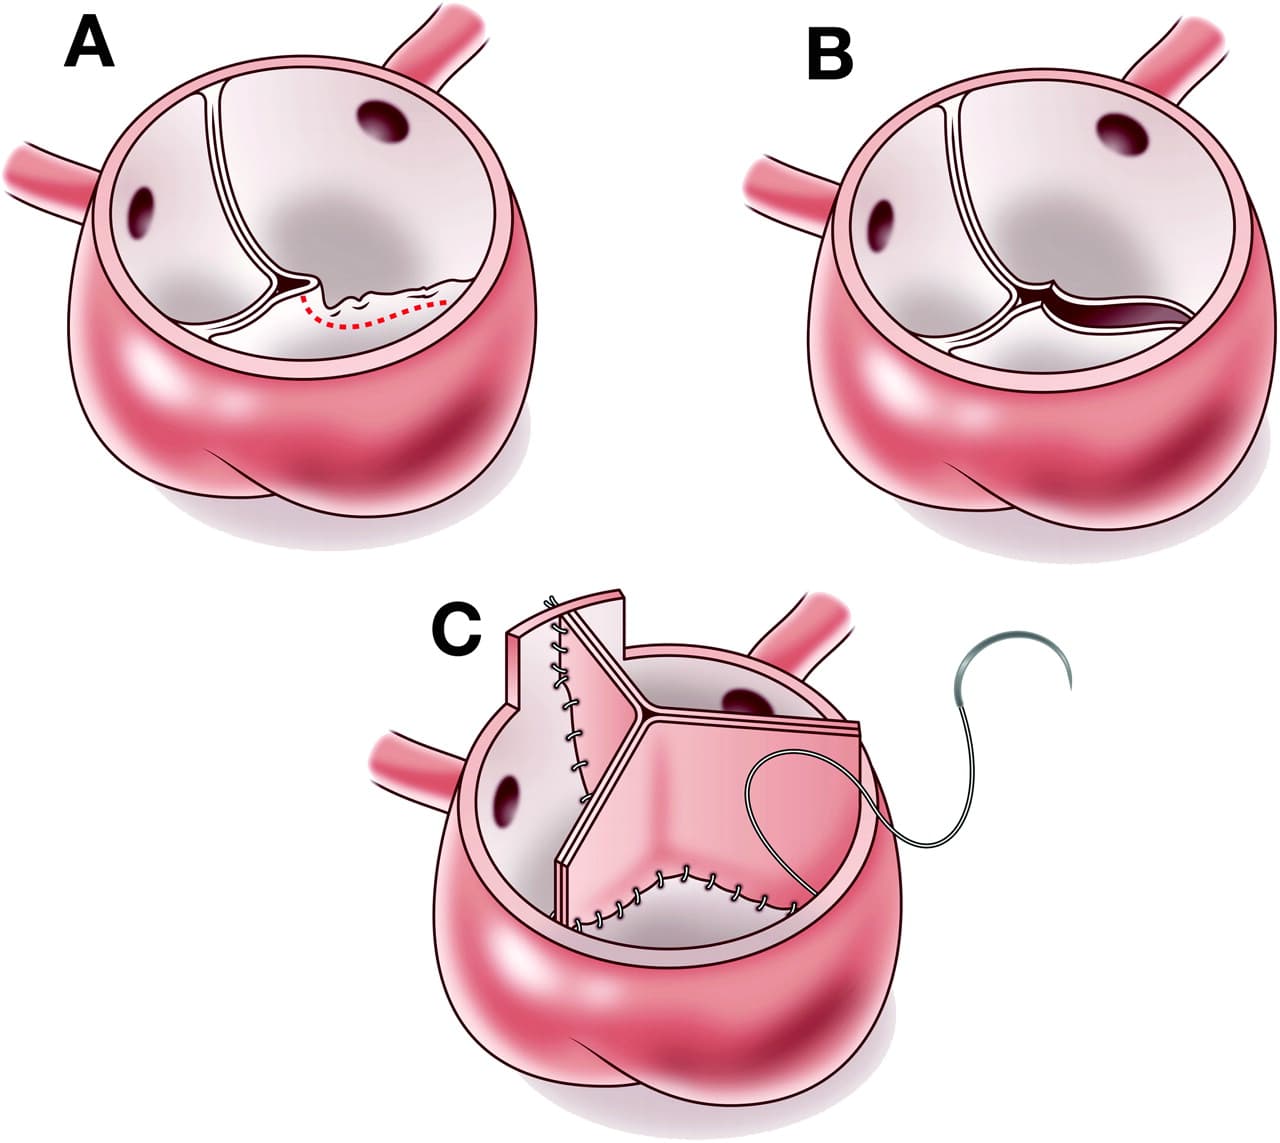 Aortic valve surgery in children